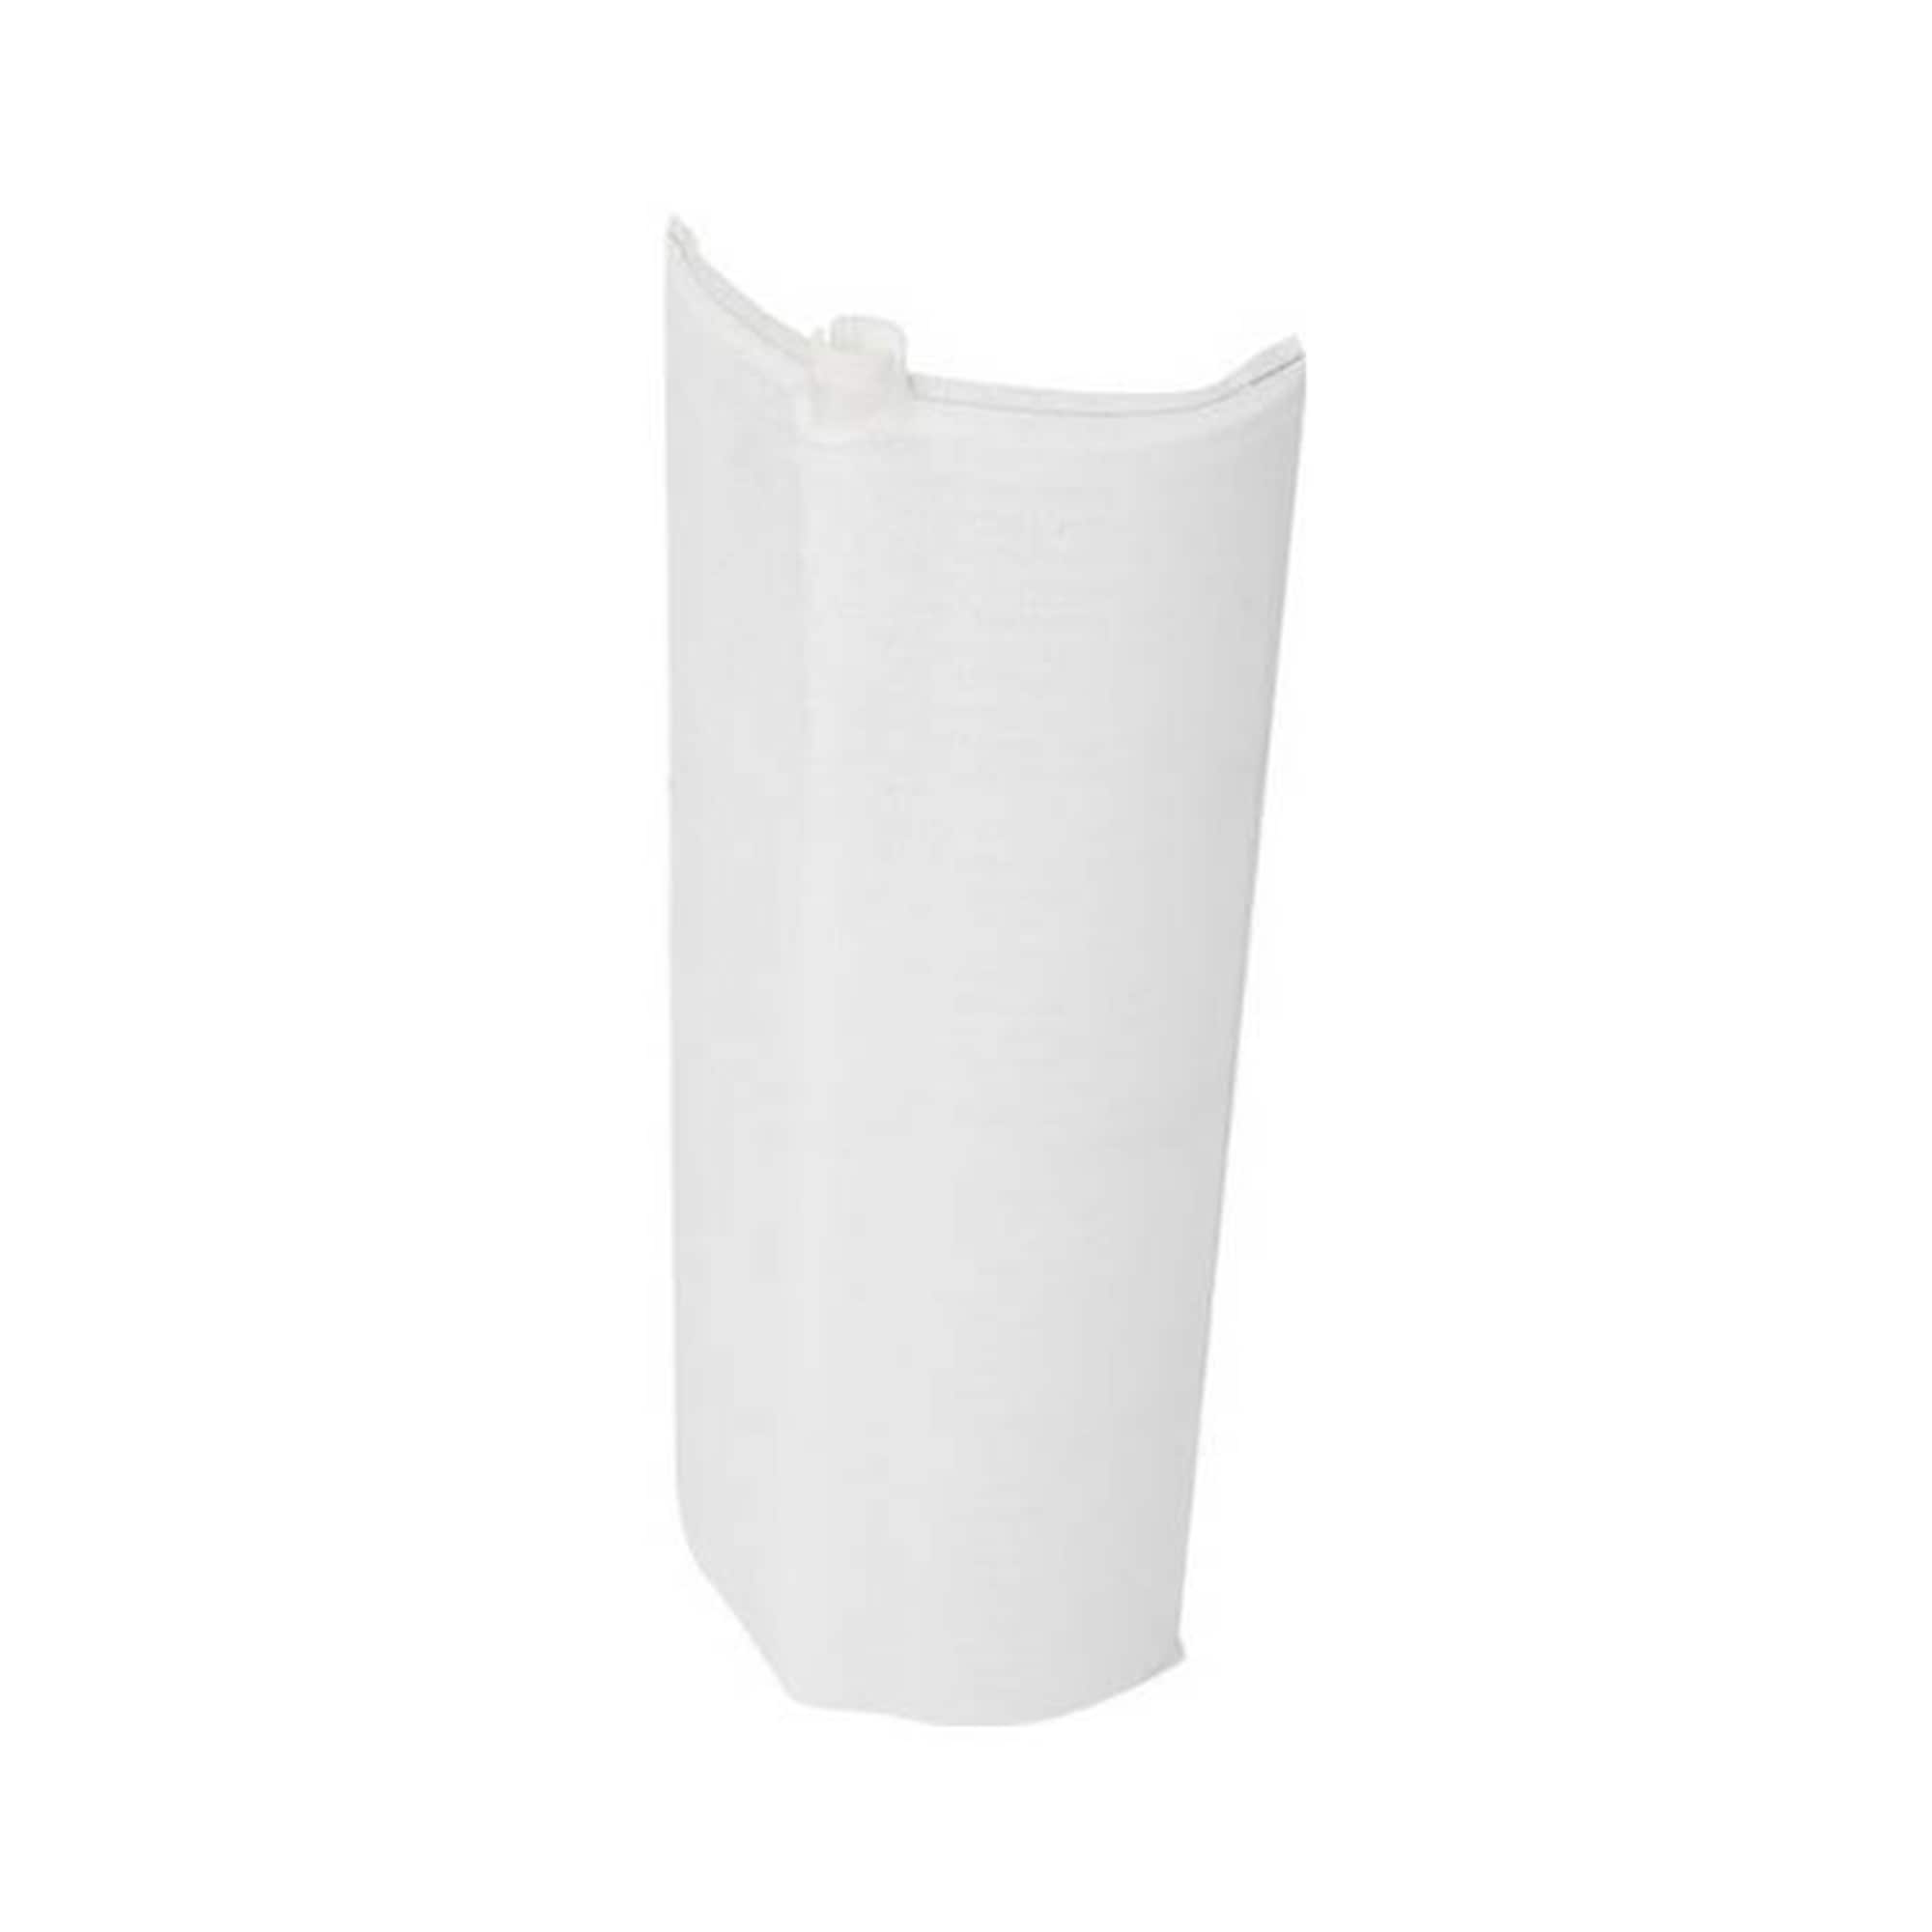 Unicel 18-in x 11-in dia 25-sq ft Pool Cartridge Filter at Lowes.com